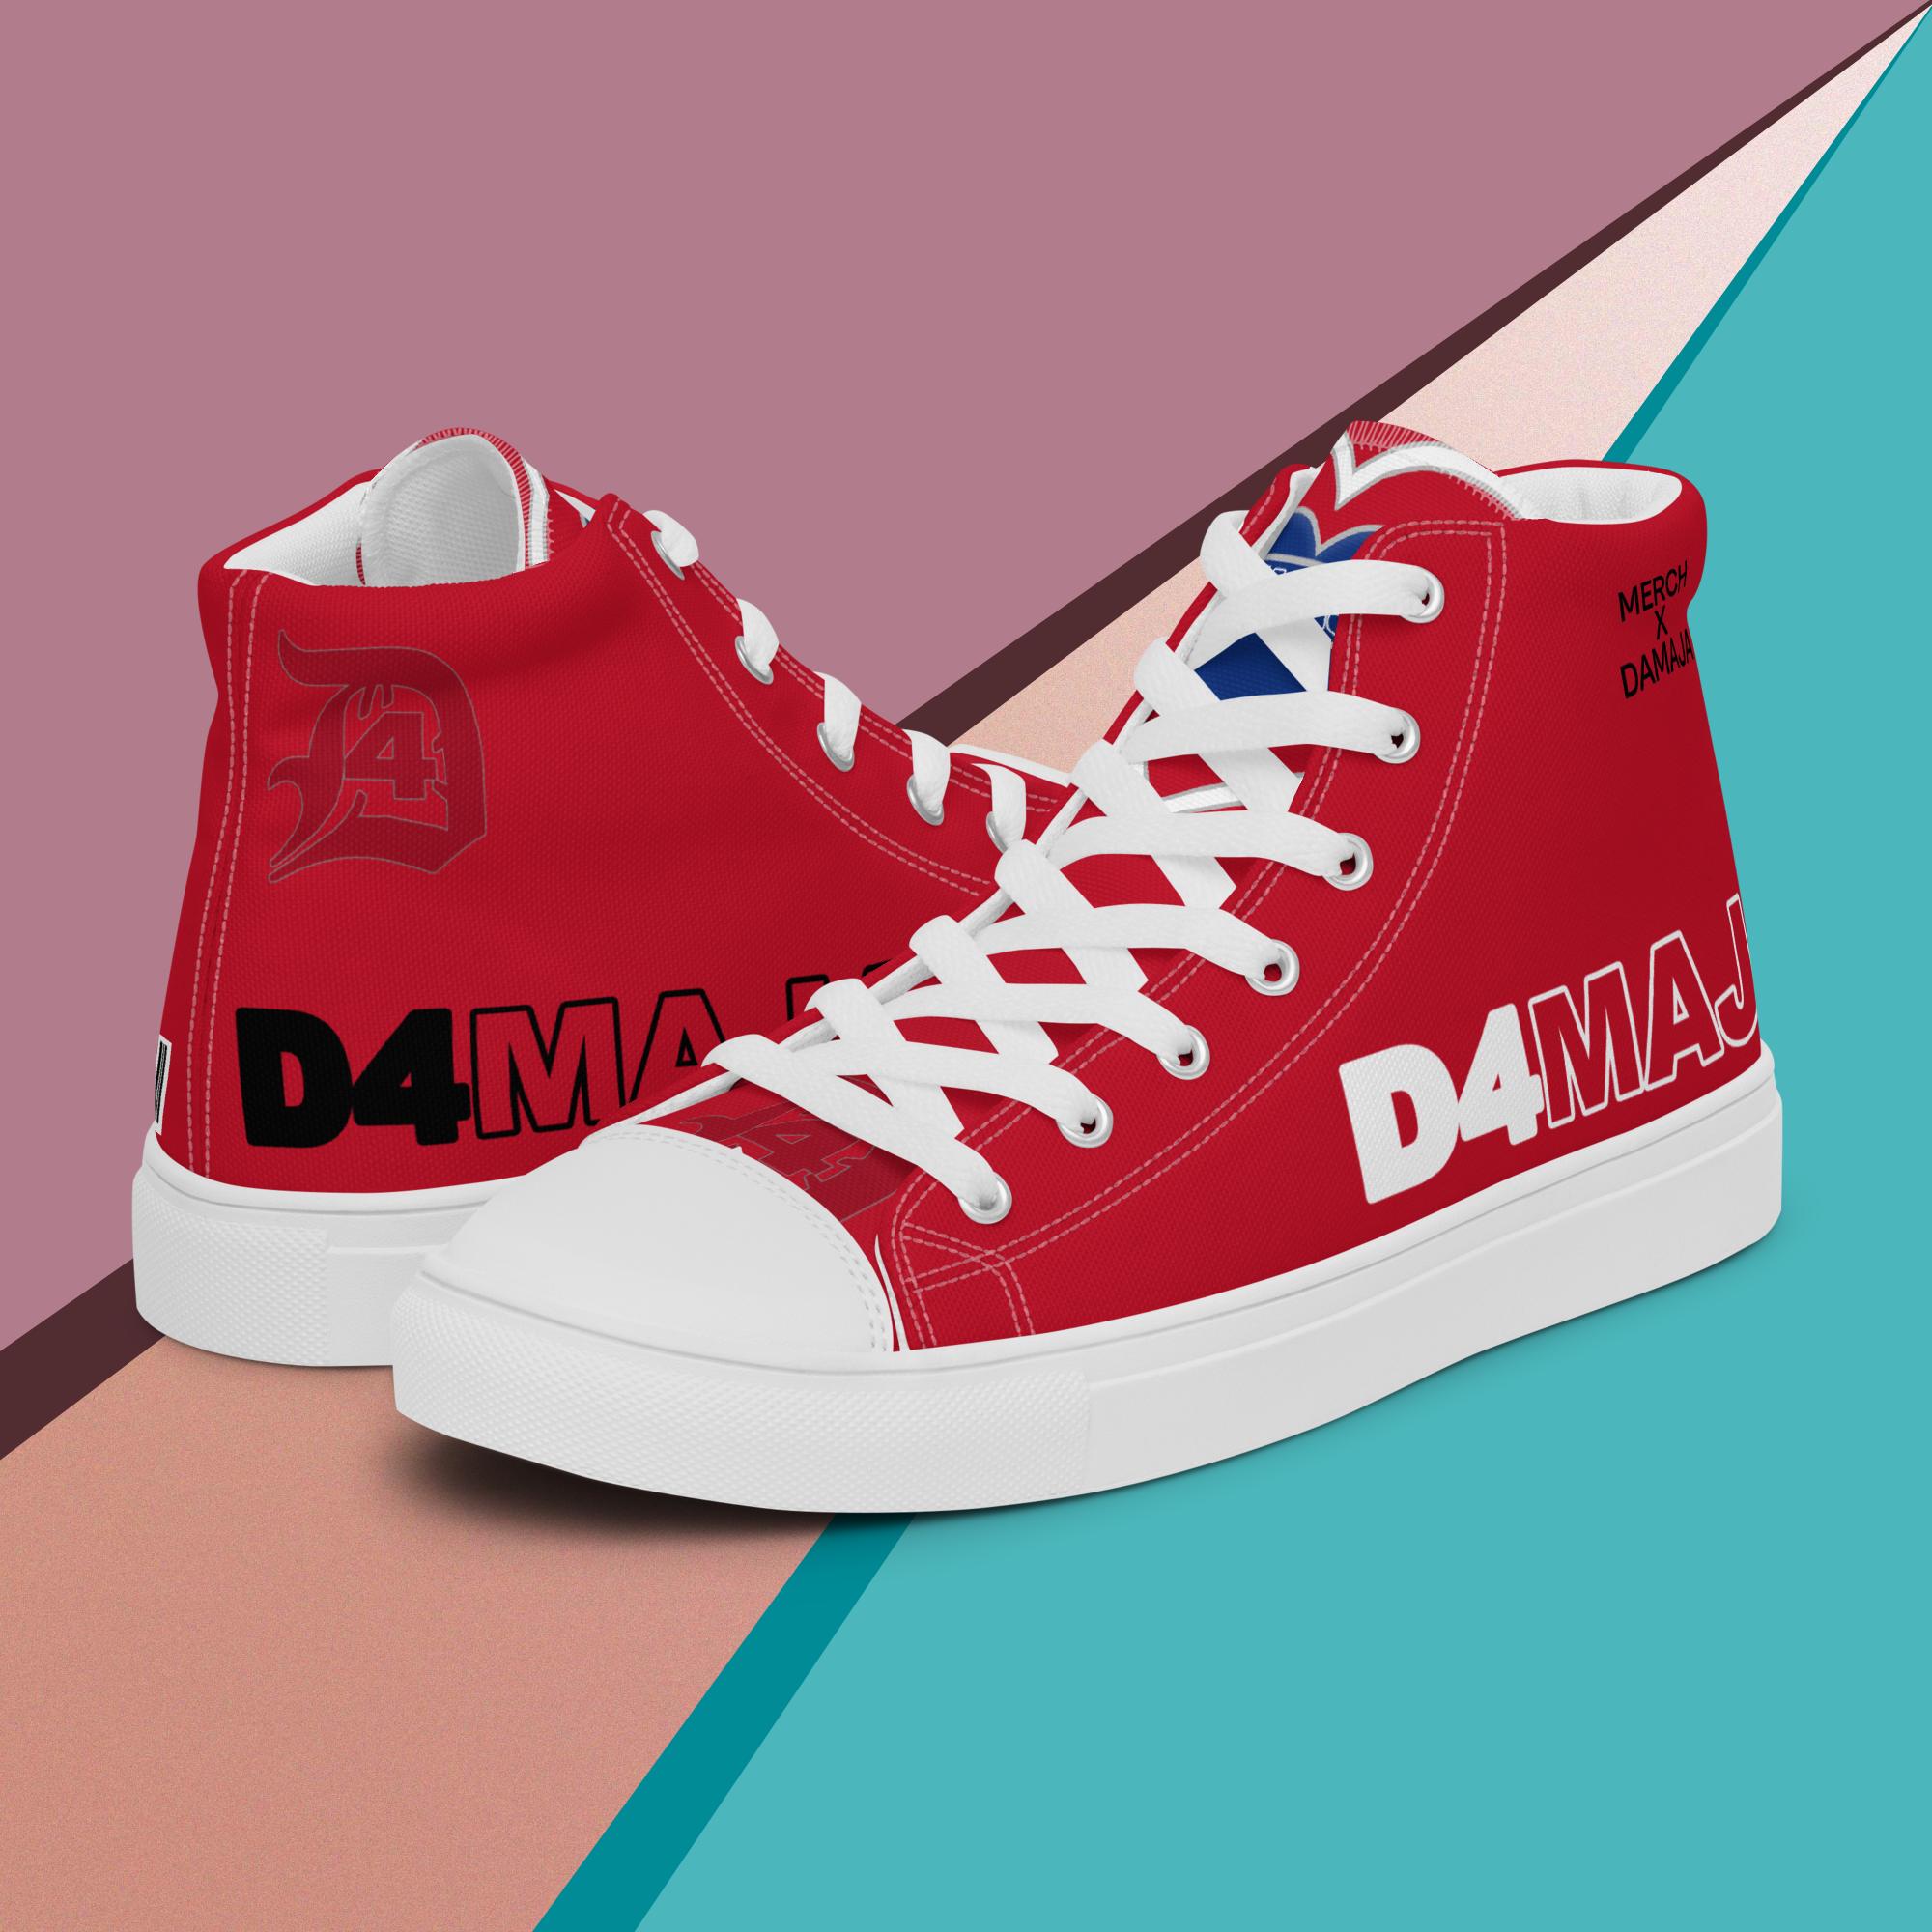 Red canvas sneakers